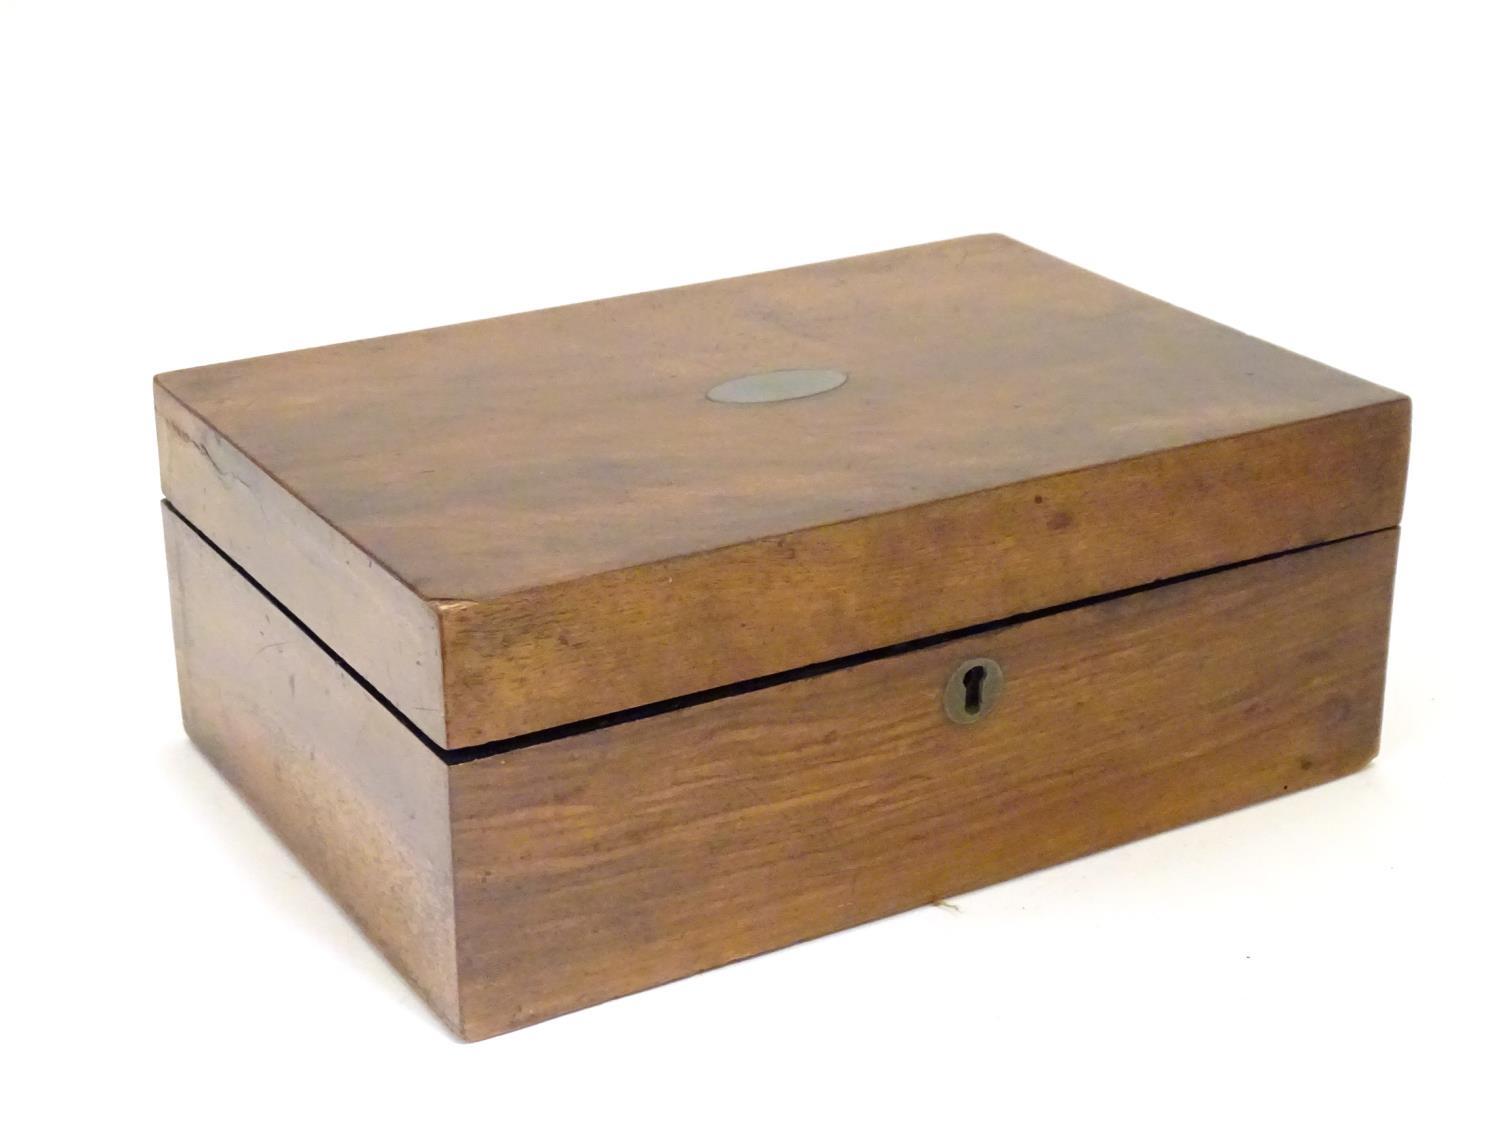 A 19thC walnut jewellery box with fitted lift out tray within. Approx. 3 3/4" high x 9 3/4" long x 6